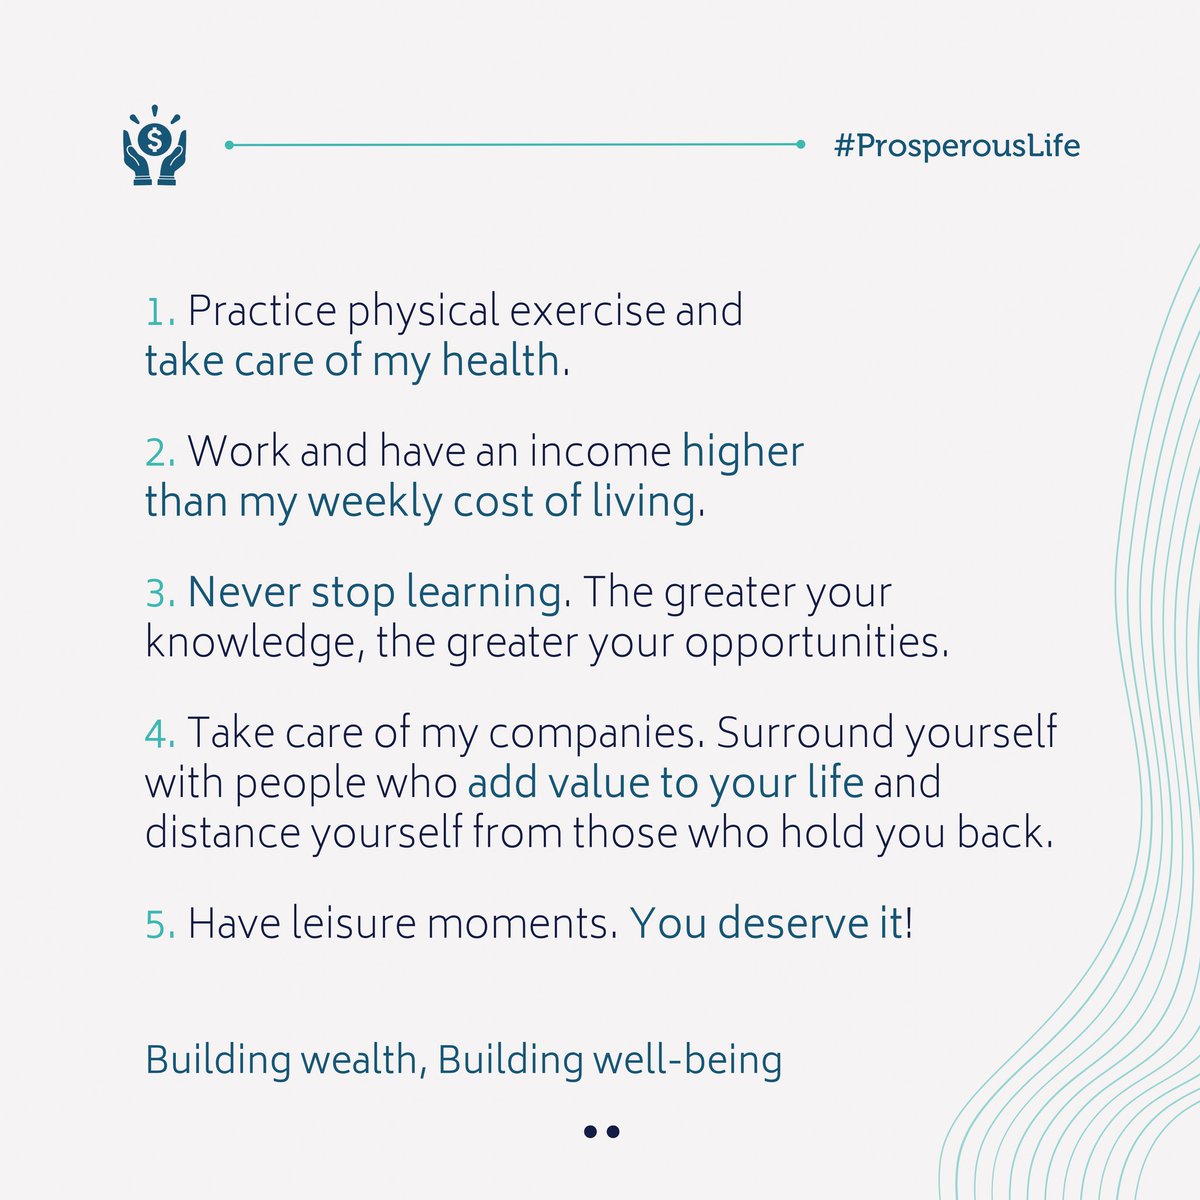 Build the life you want to have!

 #financialadviser #financialadvisorperth #piecesofadvise #financialtips #financialfreedom #wealthbuilding #buildwealth #financegoals #wealthbuilders #wealthcreators #wealthtips #investor